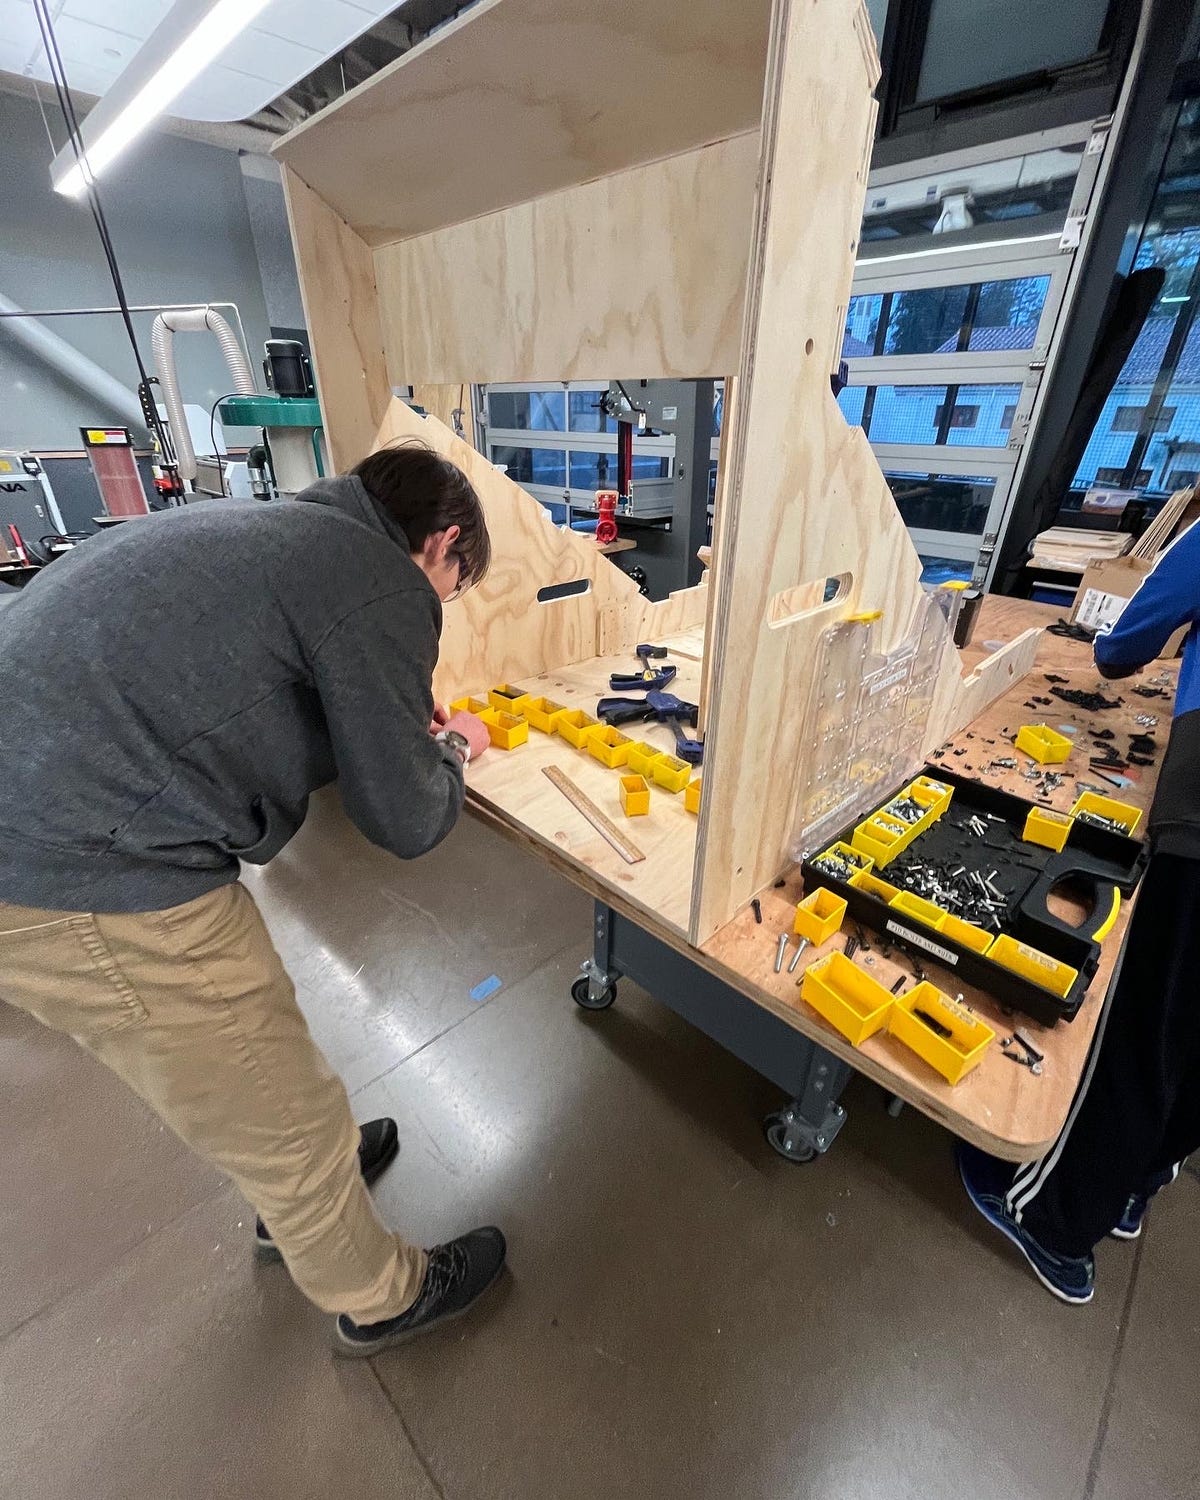 Here's FRC 8033 member Jake Baker constructing prototype field elements out of wood so the team can practice on a simulated competition field.